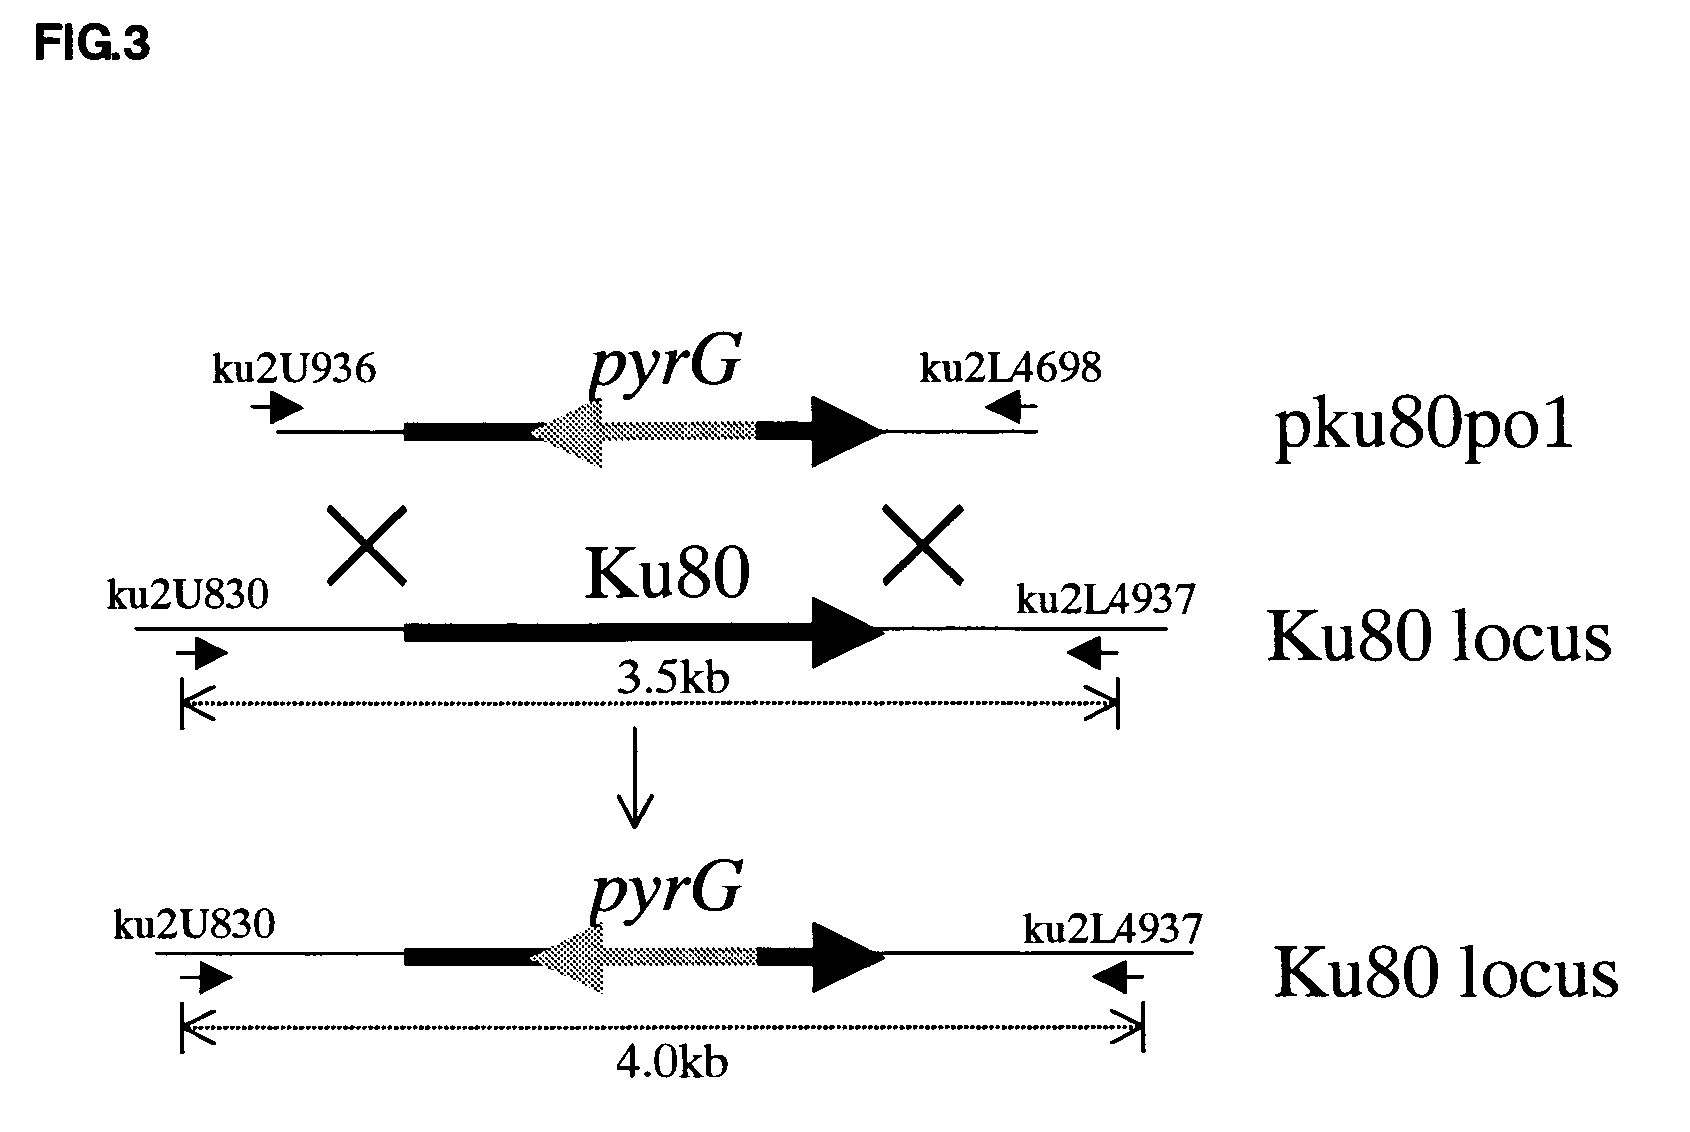 Transformant having an increased frequency of homologous recombination